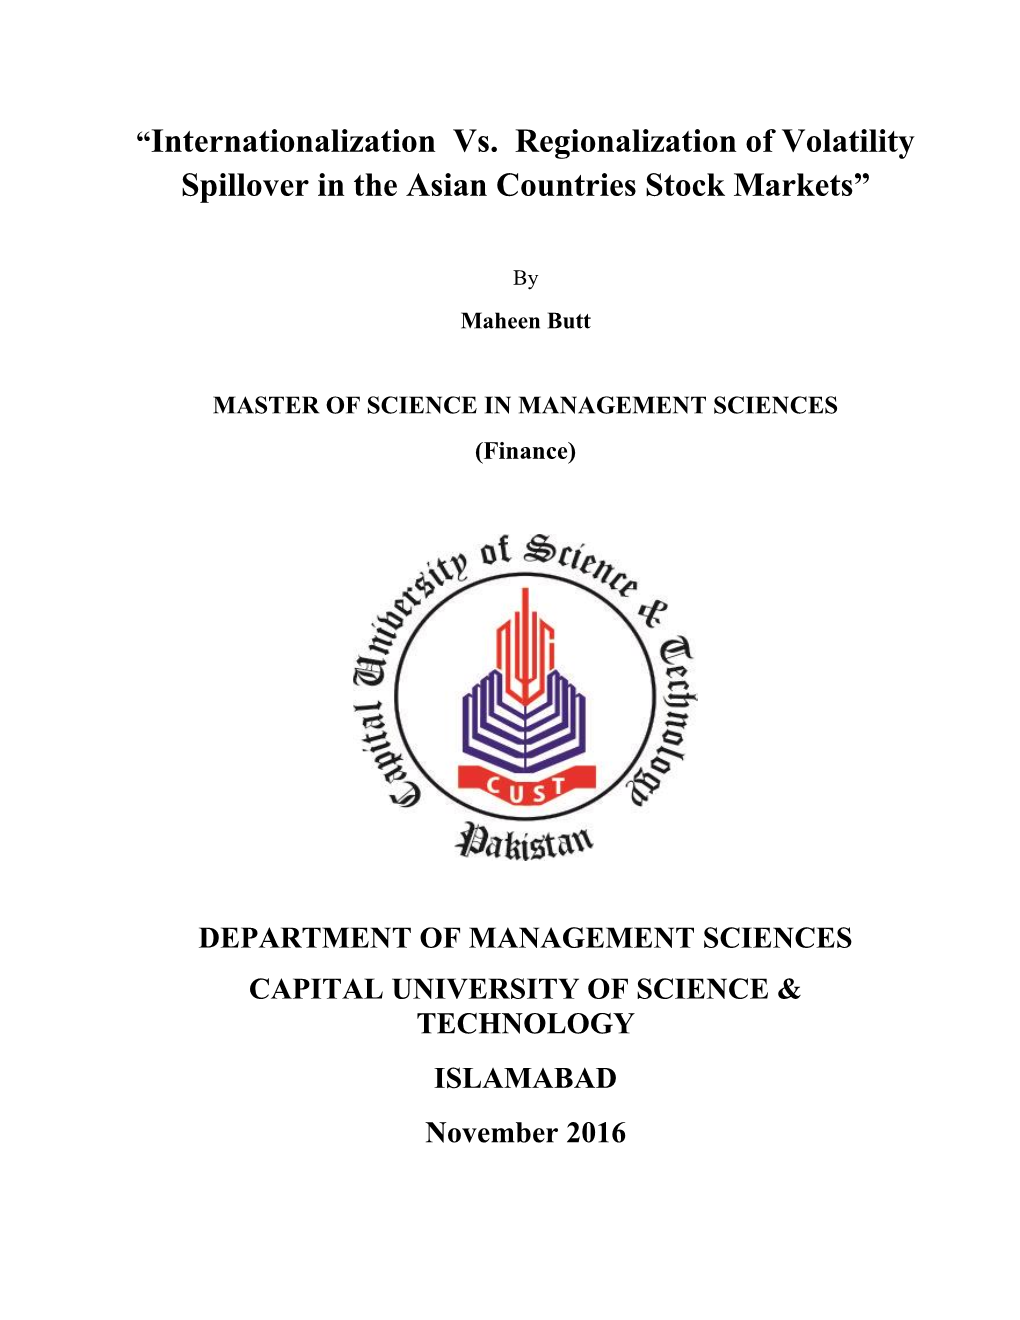 Internationalization Vs. Regionalization of Volatility Spillover in the Asian Countries Stock Markets”